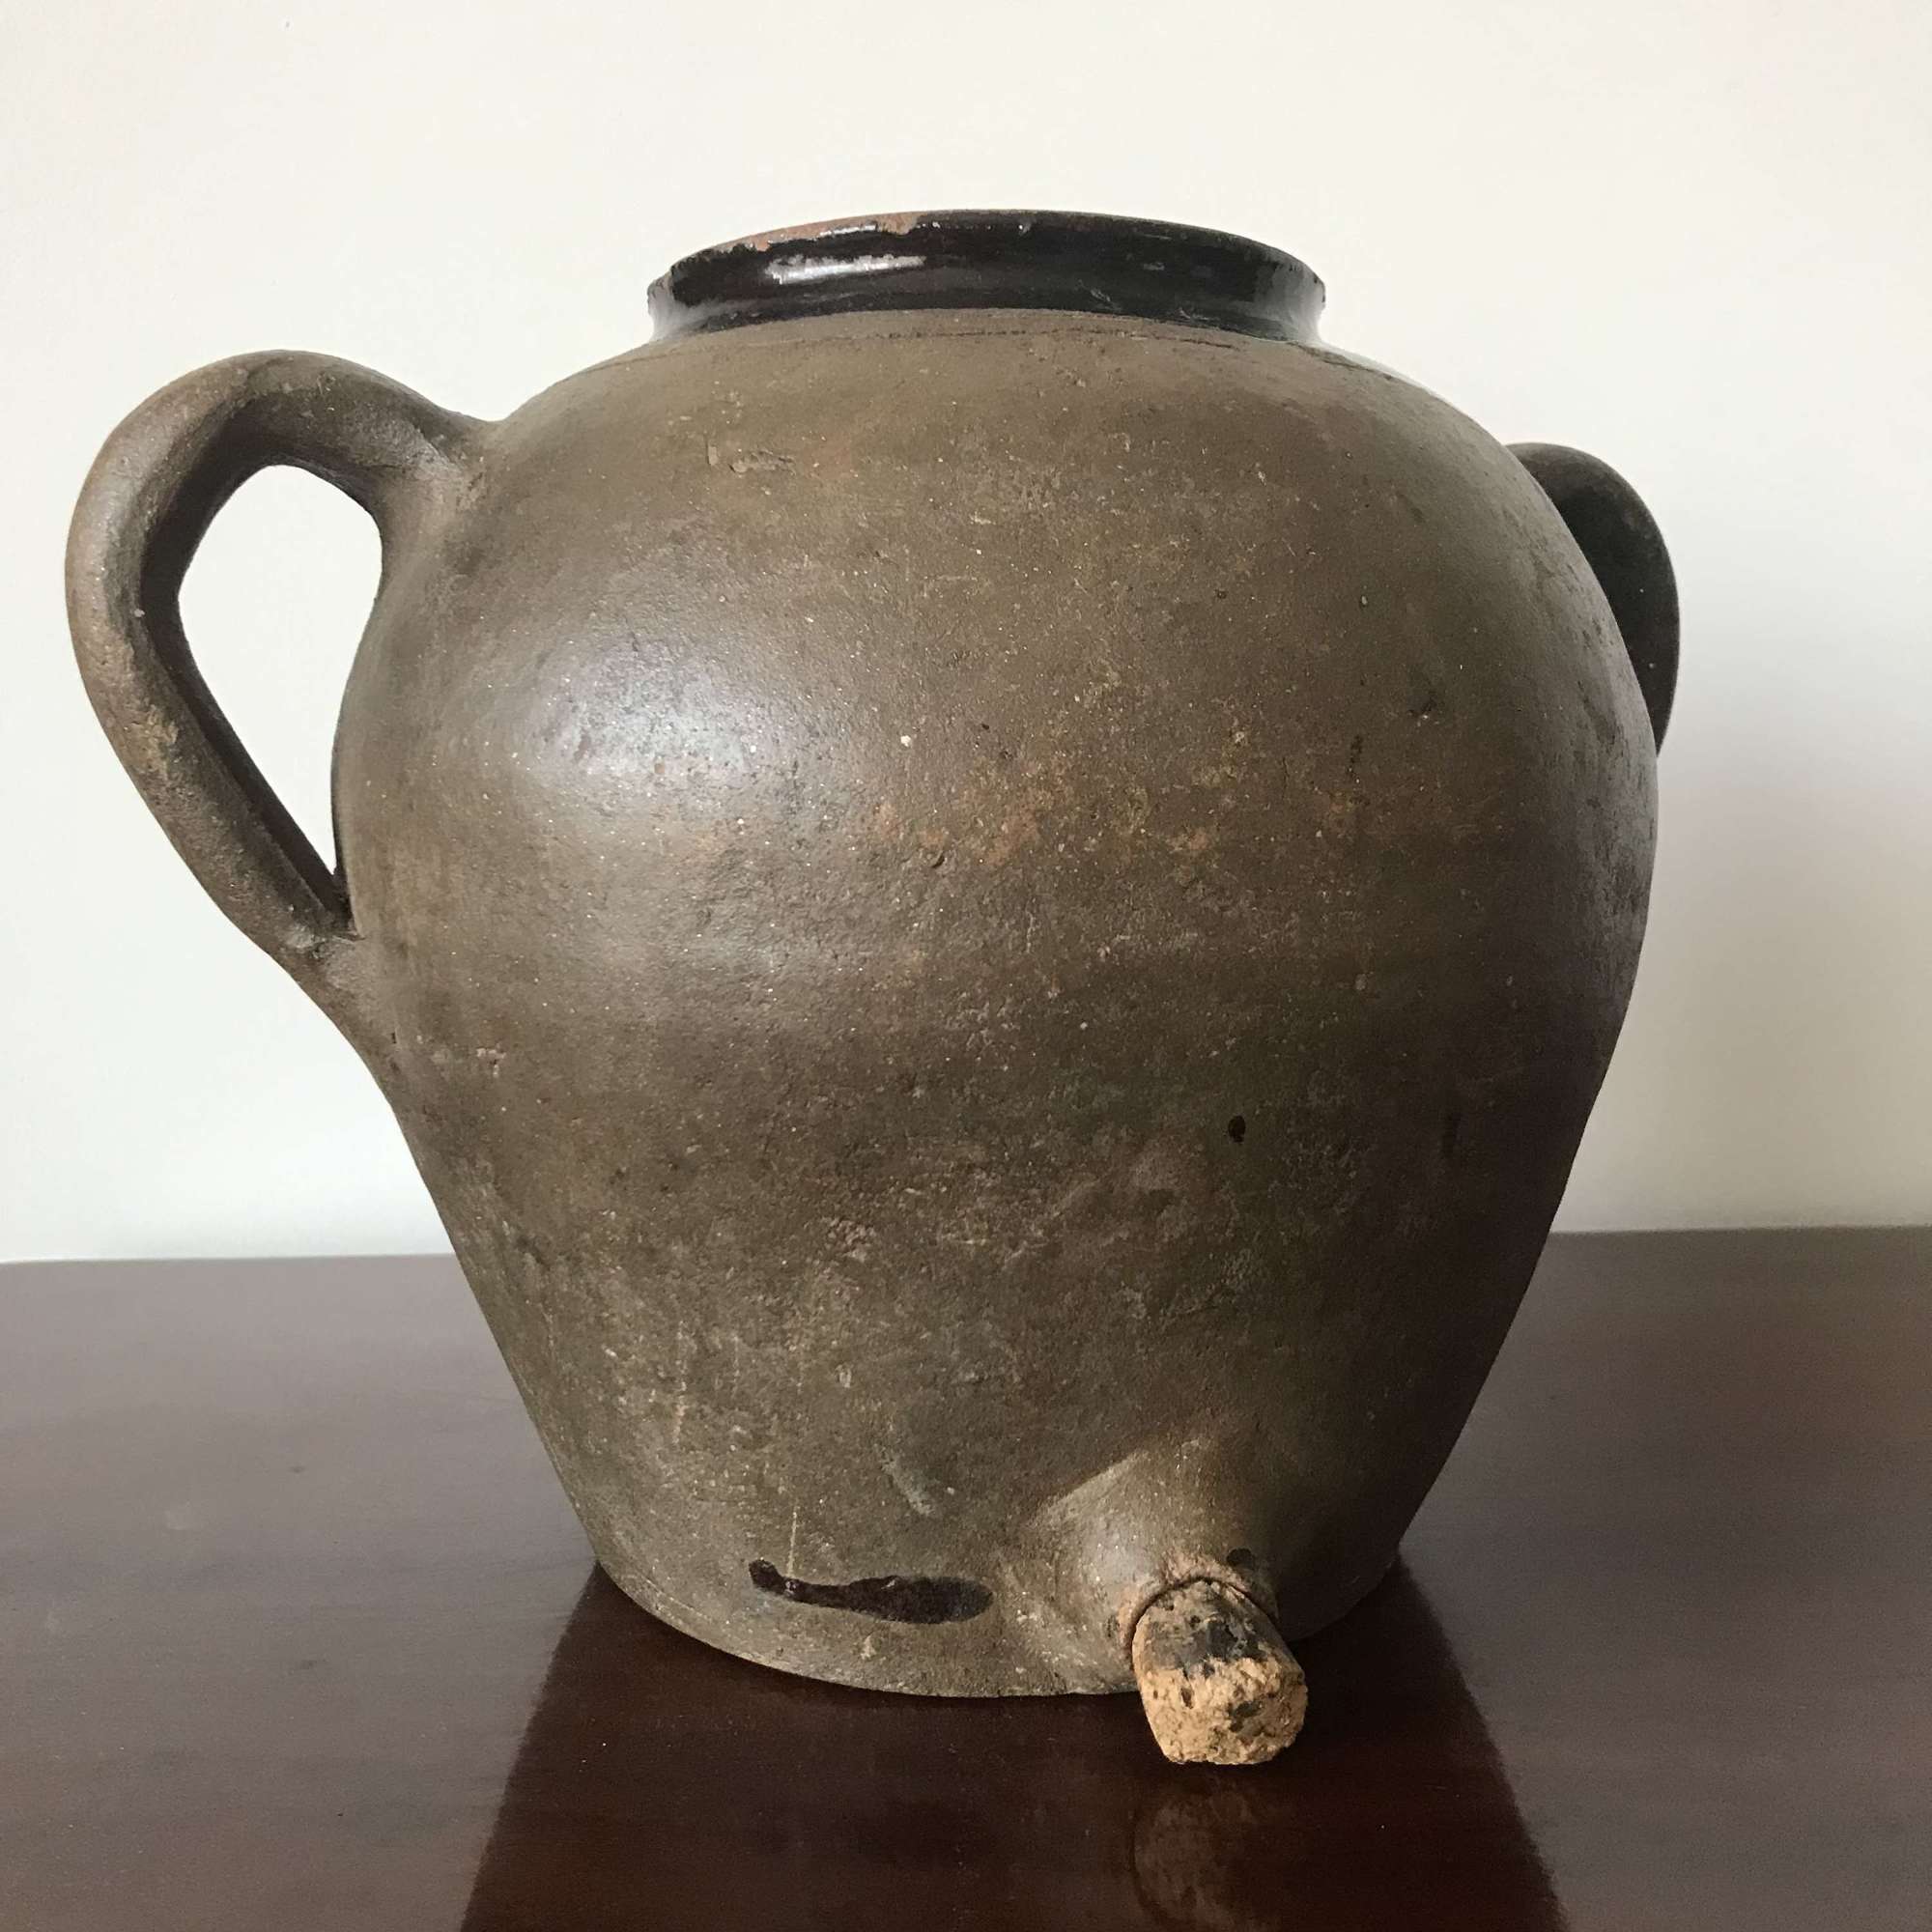 Antique oil jar with tap & bung.